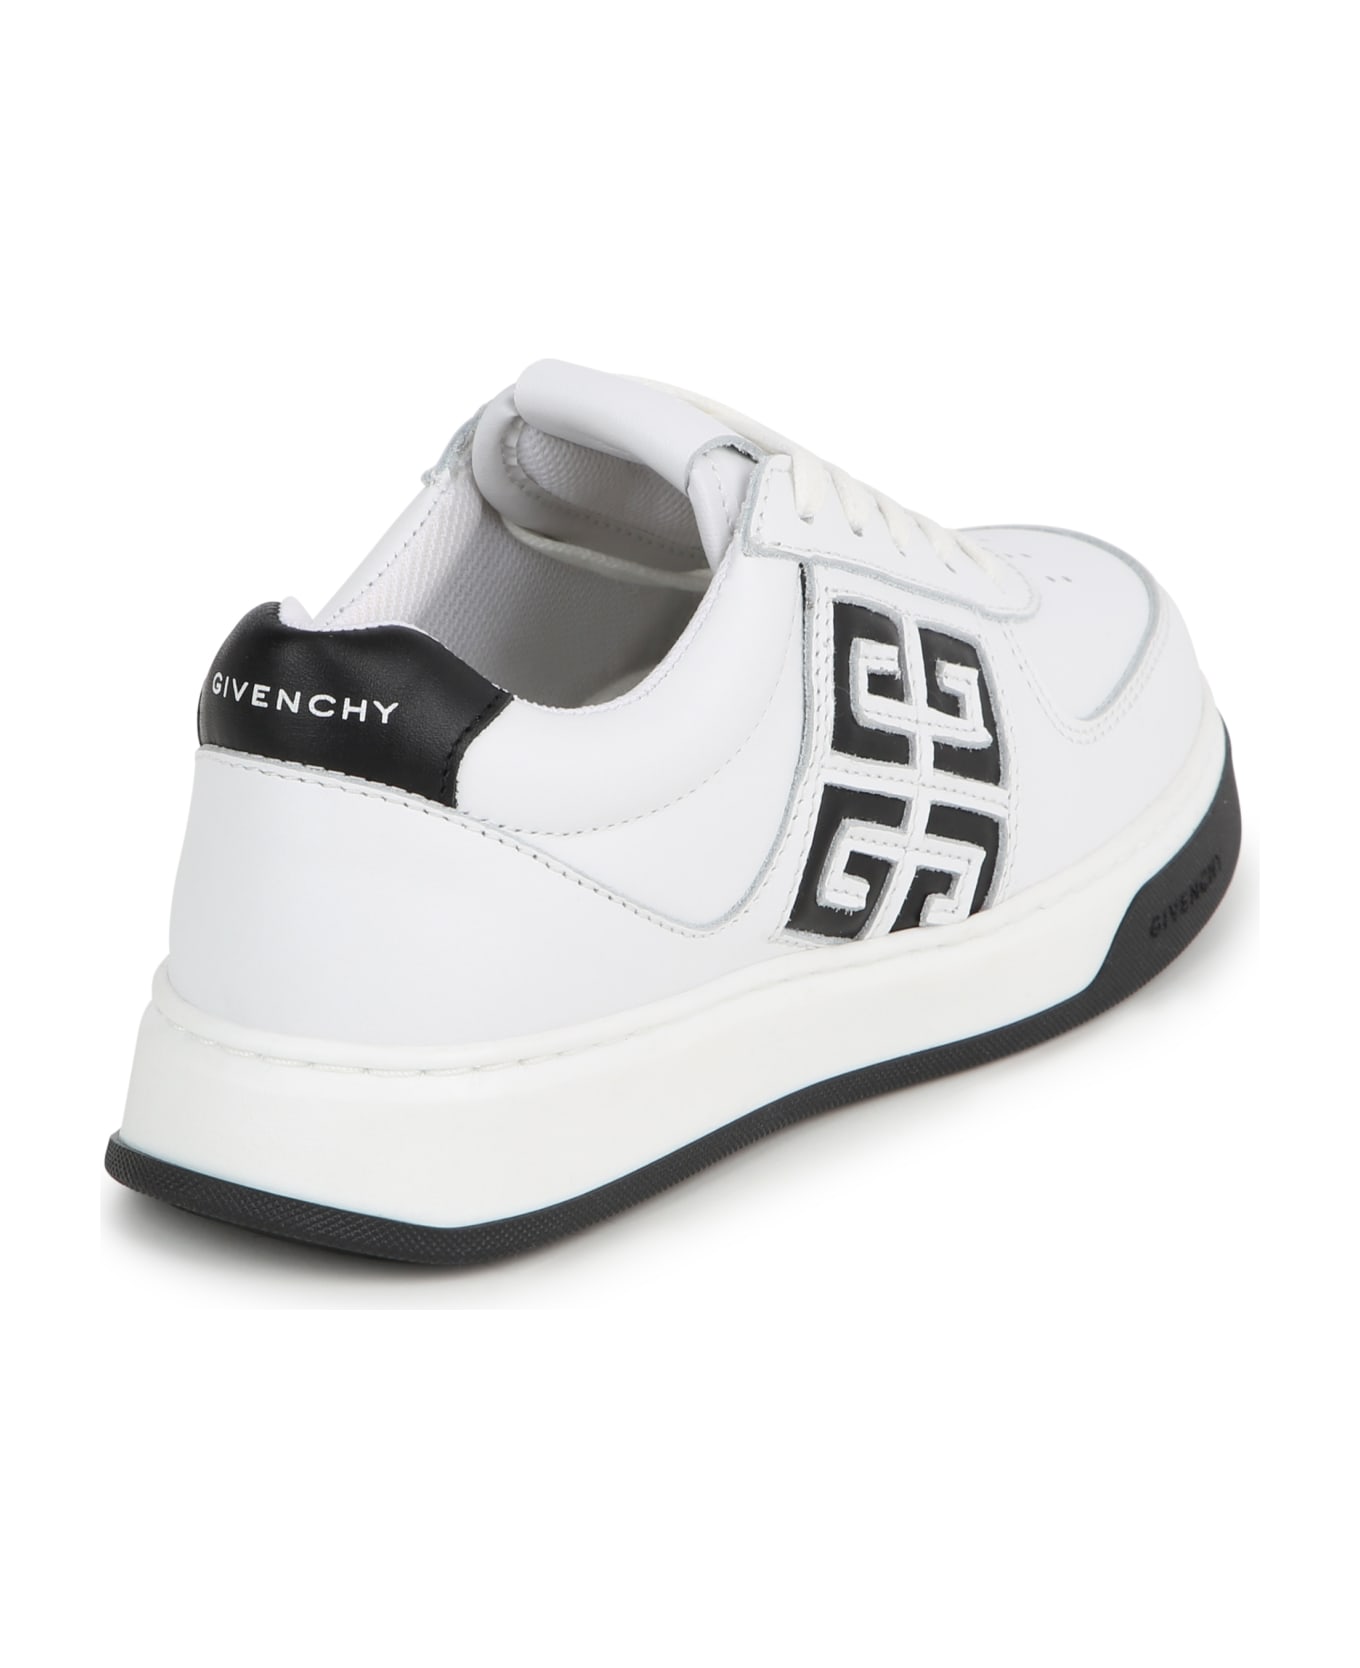 Givenchy 4g Leather Sneakers - Bianco